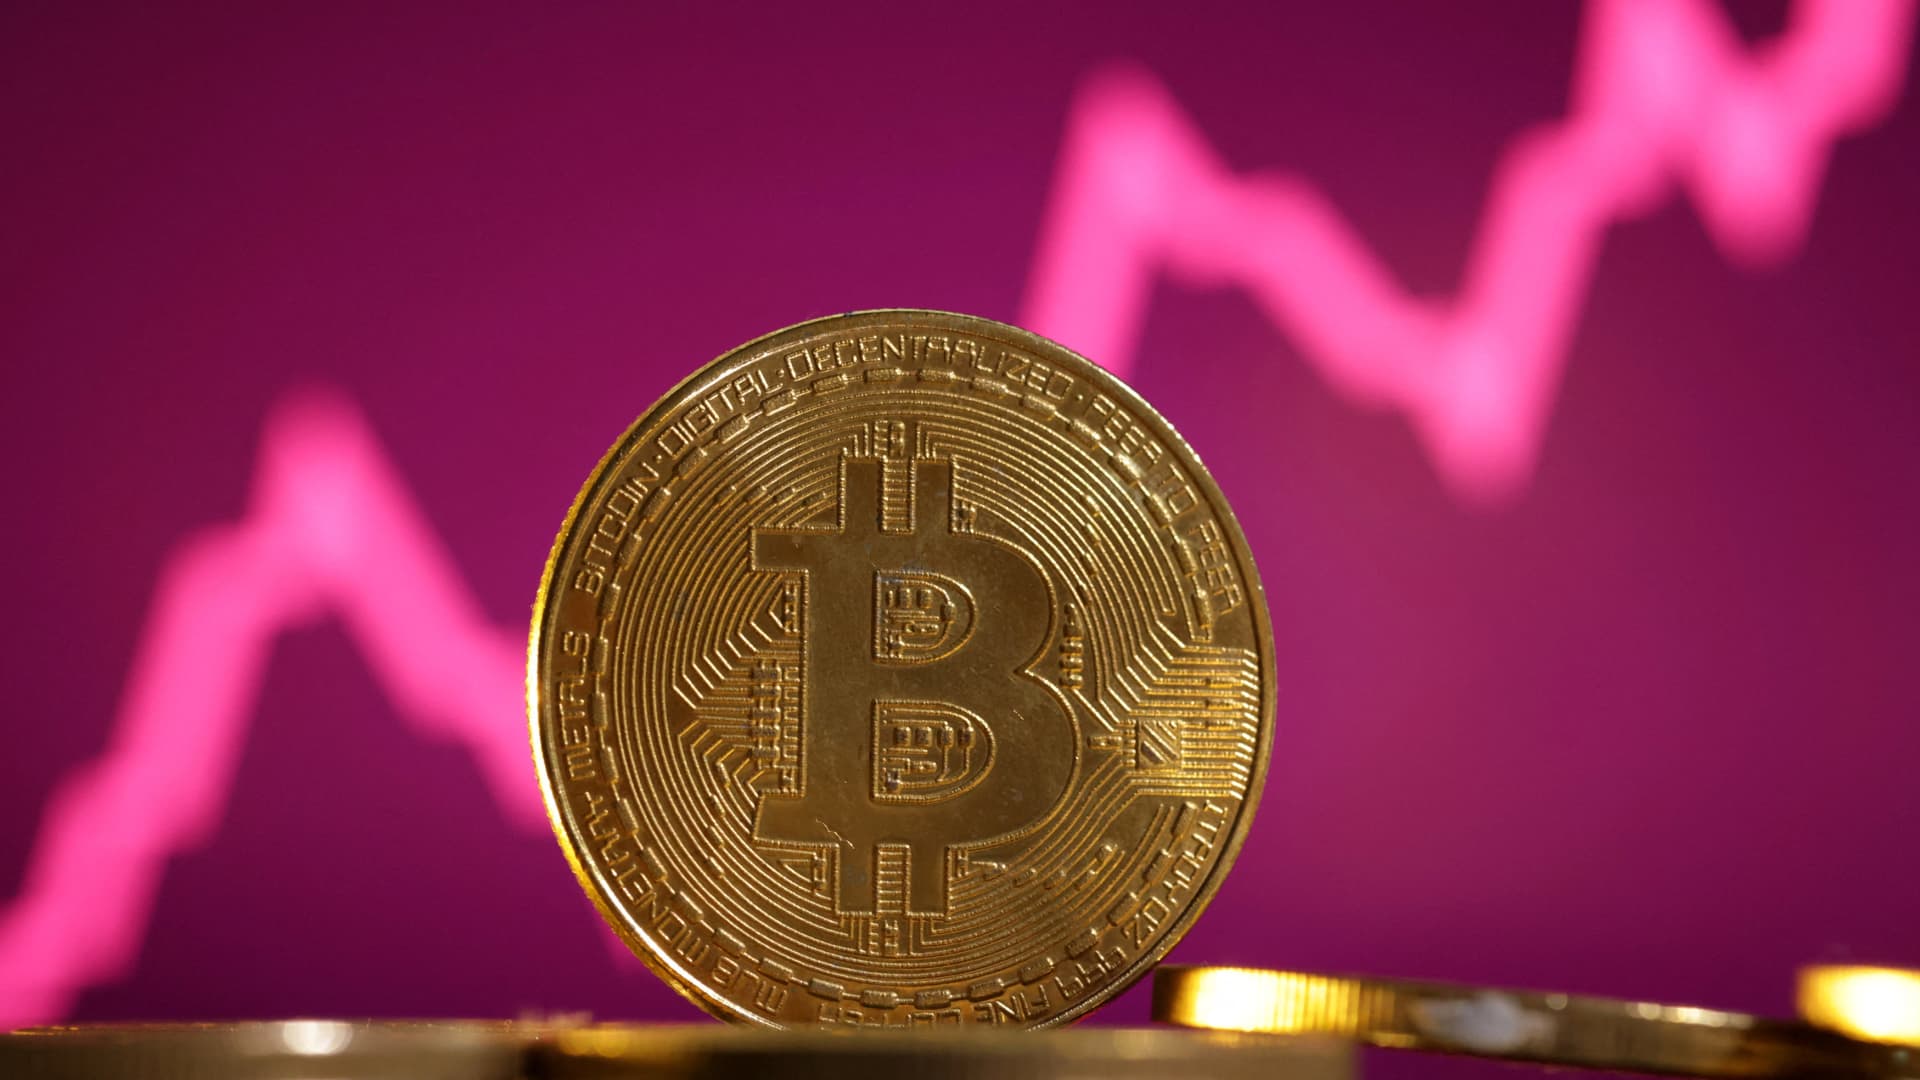 Bitcoin to reach $150,000 if Trump wins presidency: Standard Chartered